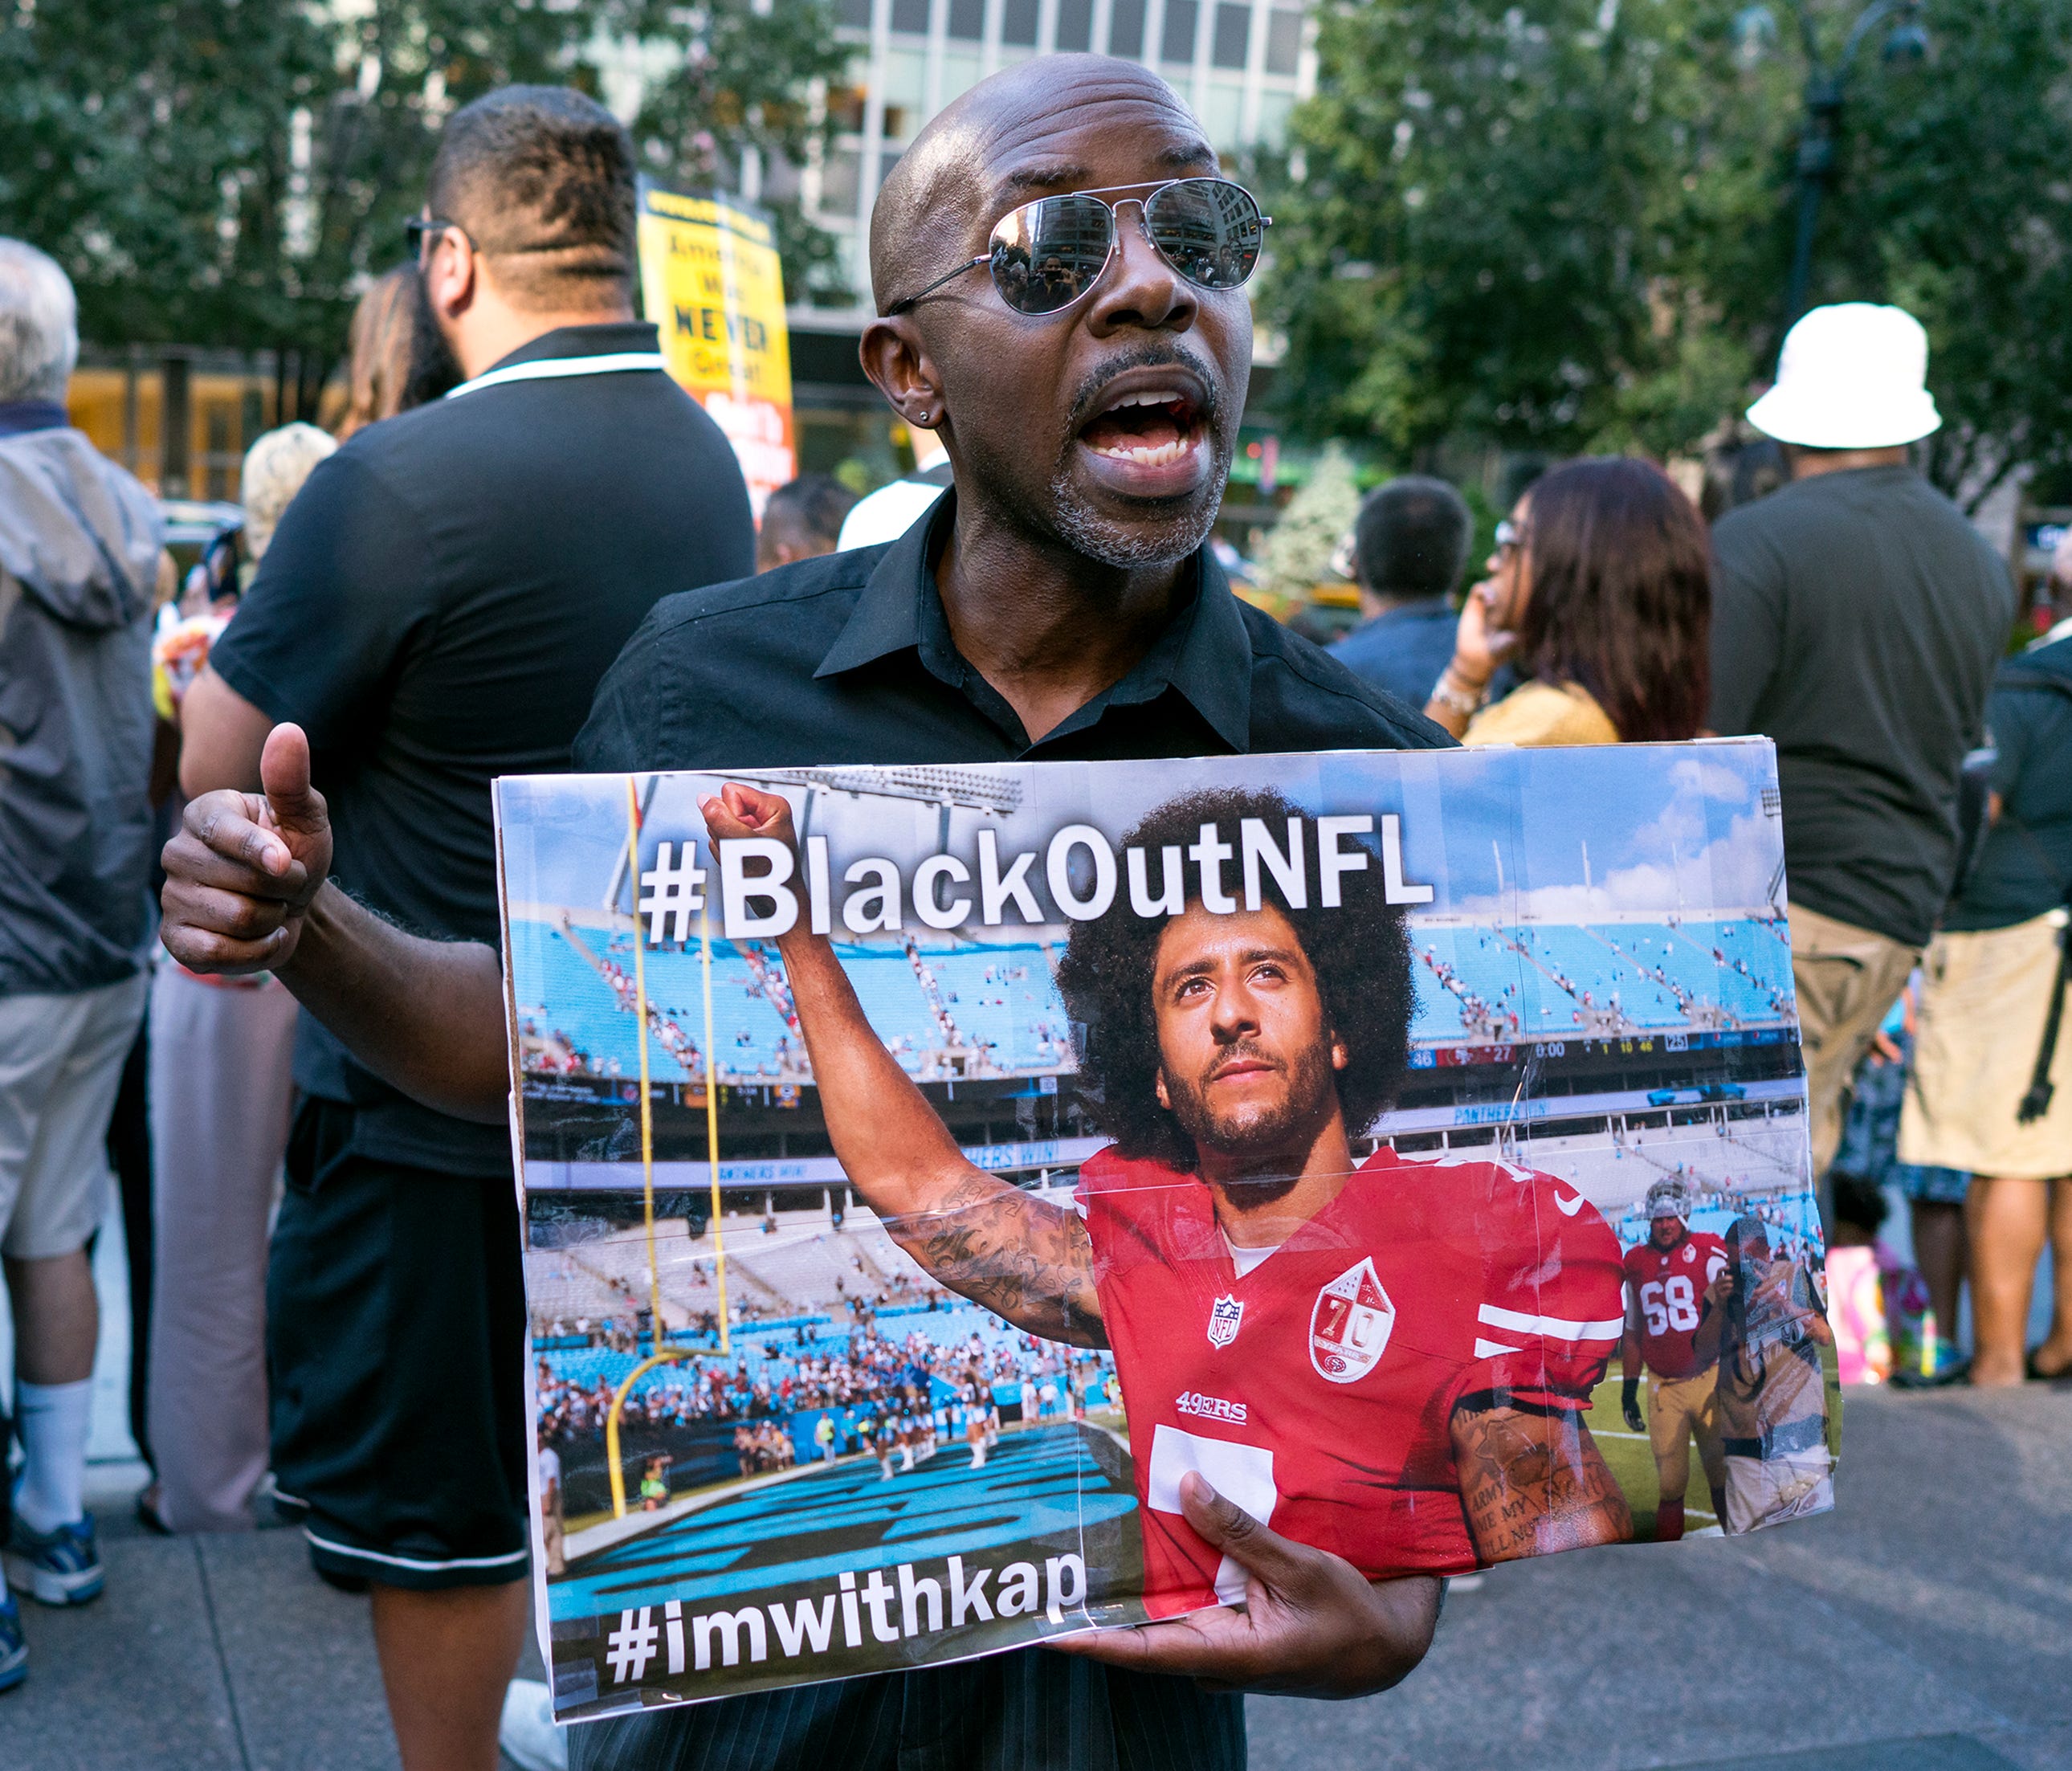 Eric Hamilton of New York joins others gathered in support of unsigned NFL quarterback Colin Kaepernick on Wednesday, Aug 23, 2017, in front of NFL headquarters in New York.